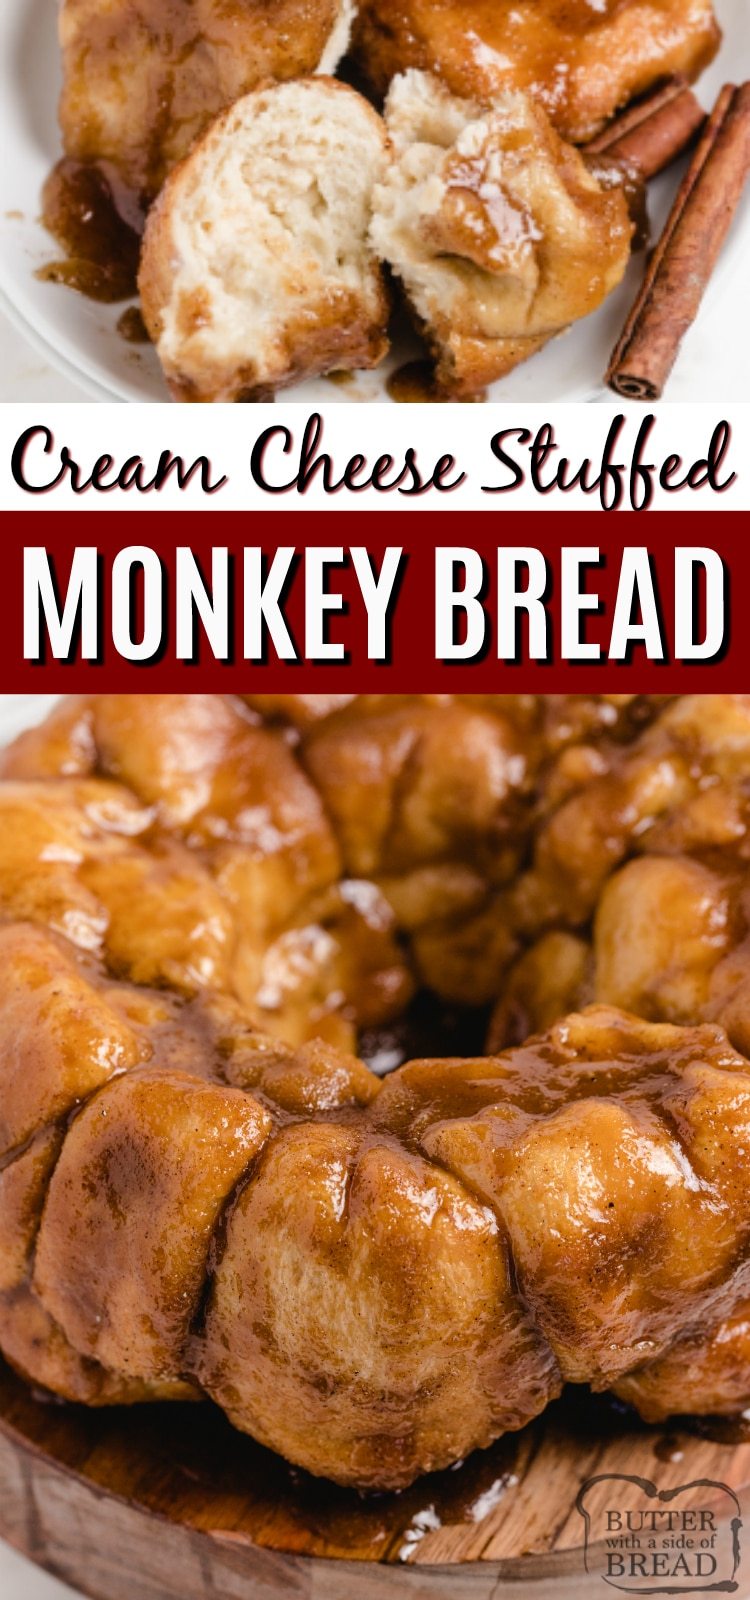 Cream Cheese Stuffed Monkey Bread - warm, gooey cinnamon rolls made with frozen rolls that are filled with cream cheese and coated in brown sugar, butter and cinnamon sugar. Only 5 ingredients to make delicious cinnamon roll monkey bread! 